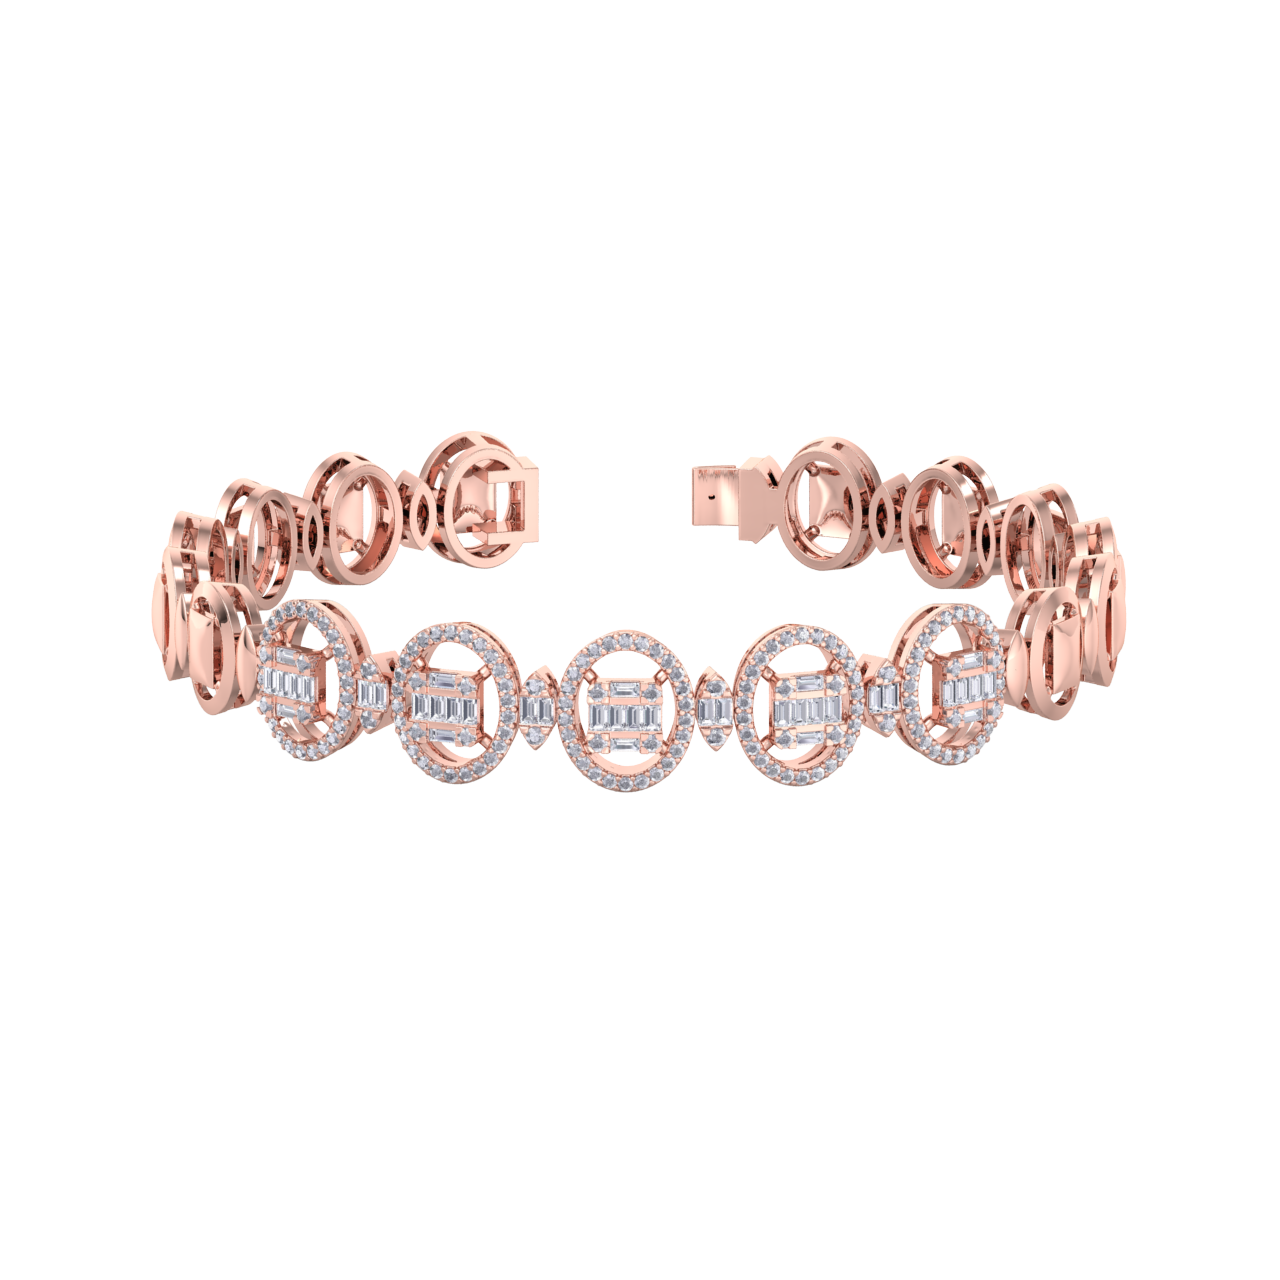 Statement bracelet in rose gold with white diamonds of 1.22 ct in weight